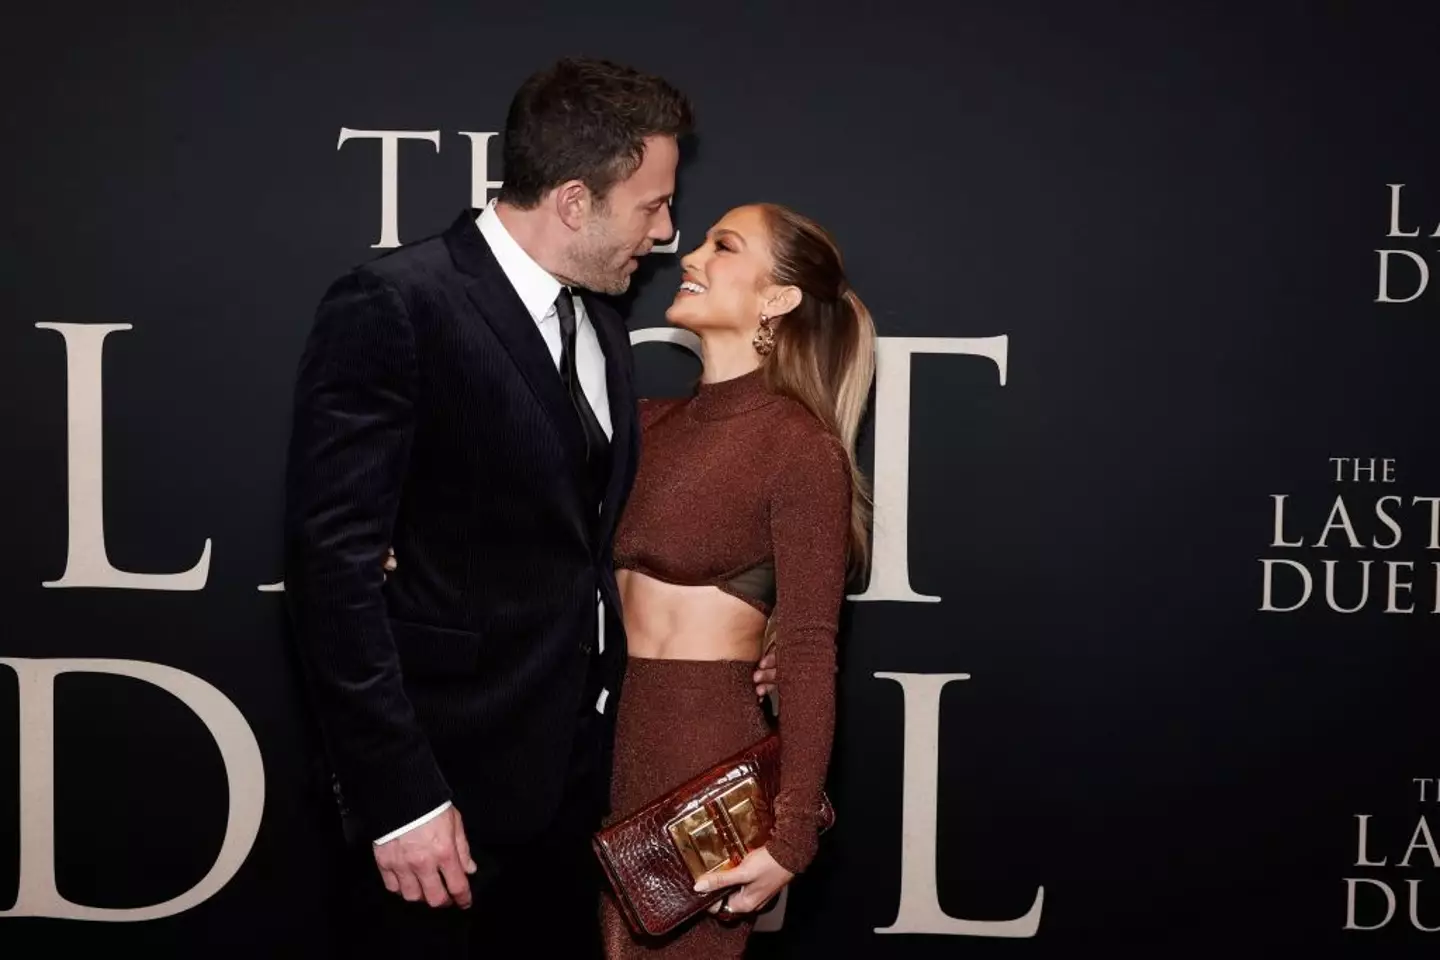 J Lo and Ben Affleck rekindled their romance almost two decades after their initial split. (Arturo Holmes/Getty Images)